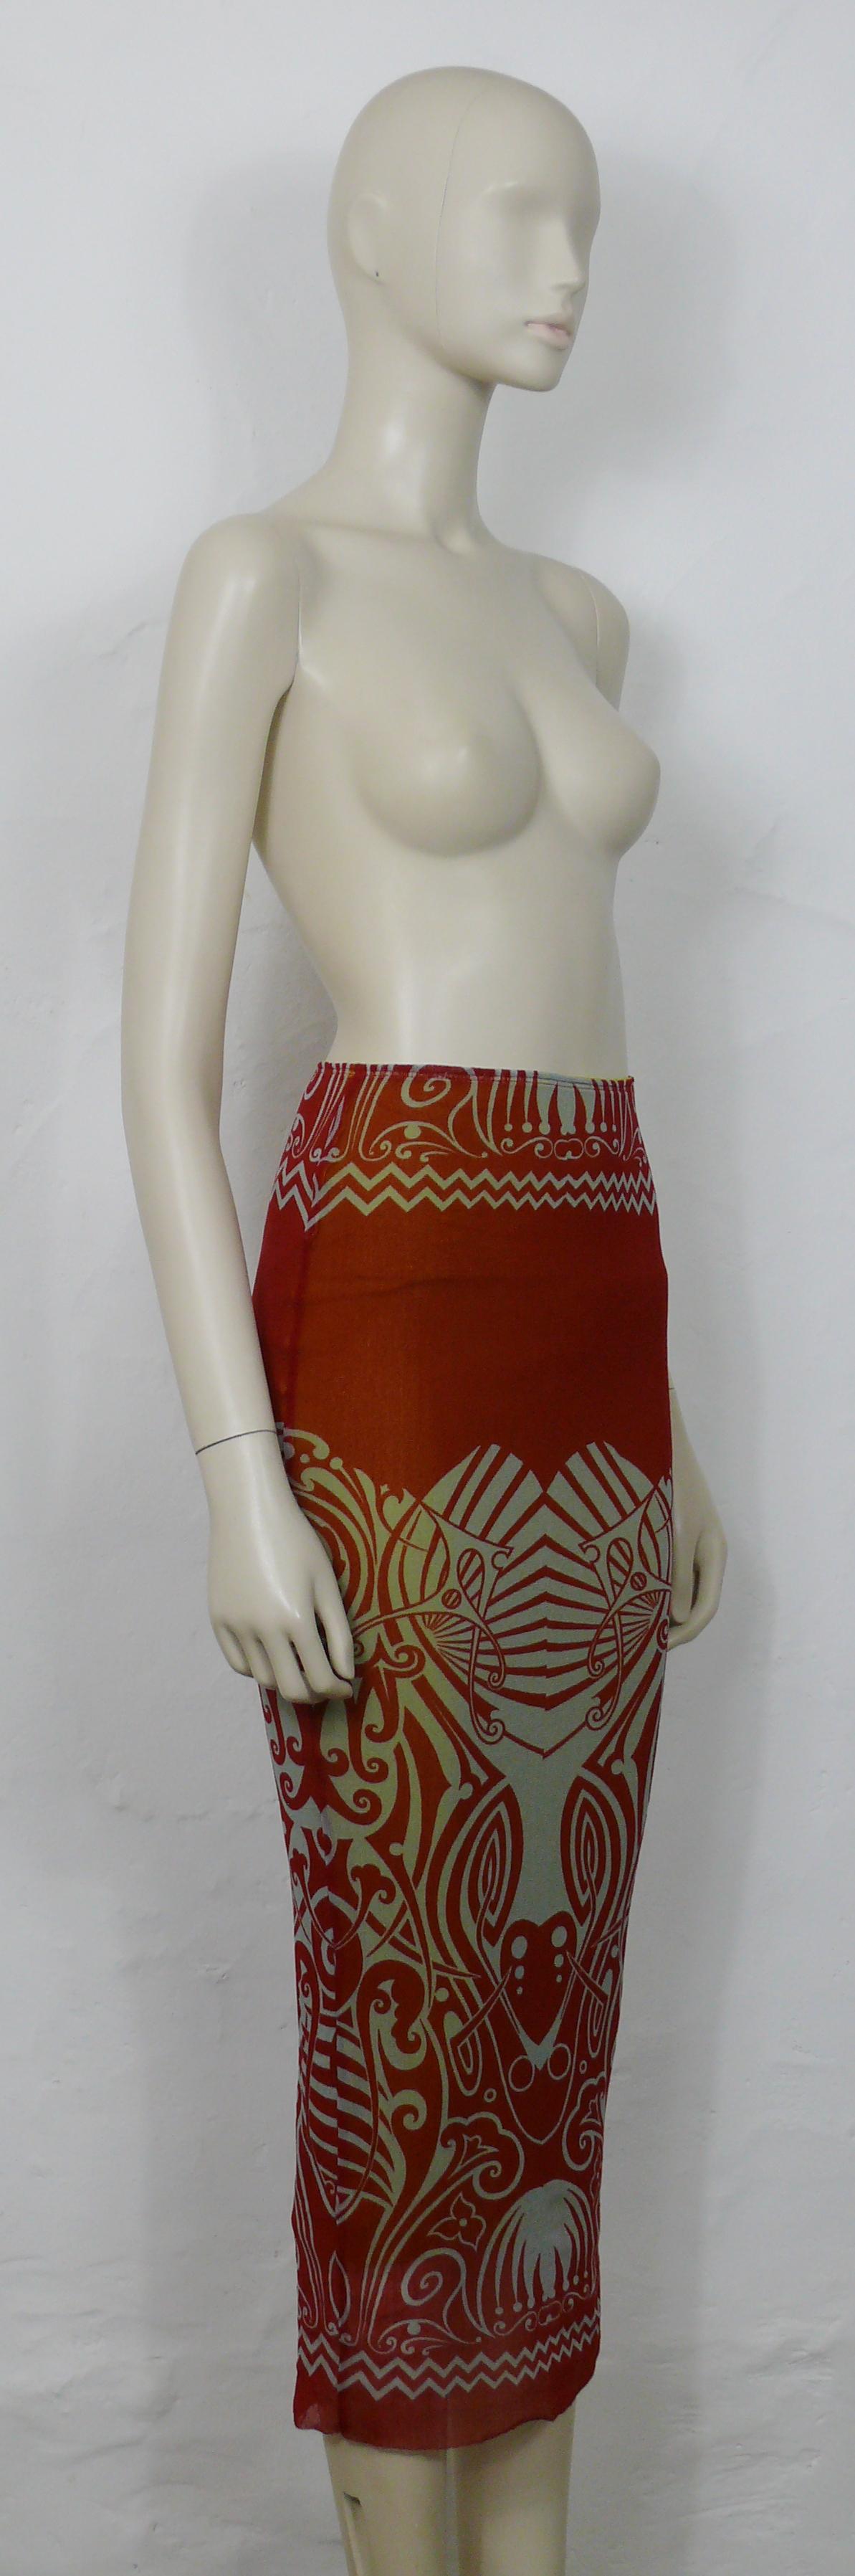 JEAN PAUL GAULTIER vintage FUZZI mesh skirt featuring a tribal tattoo print.

Slips on.
Mustard yellow color lining.

Label reads JEAN PAUL GAULTIER MAILLE.
Made in Italy.

Size label reads : S.
Please refer to measurements.

Missing composition tag